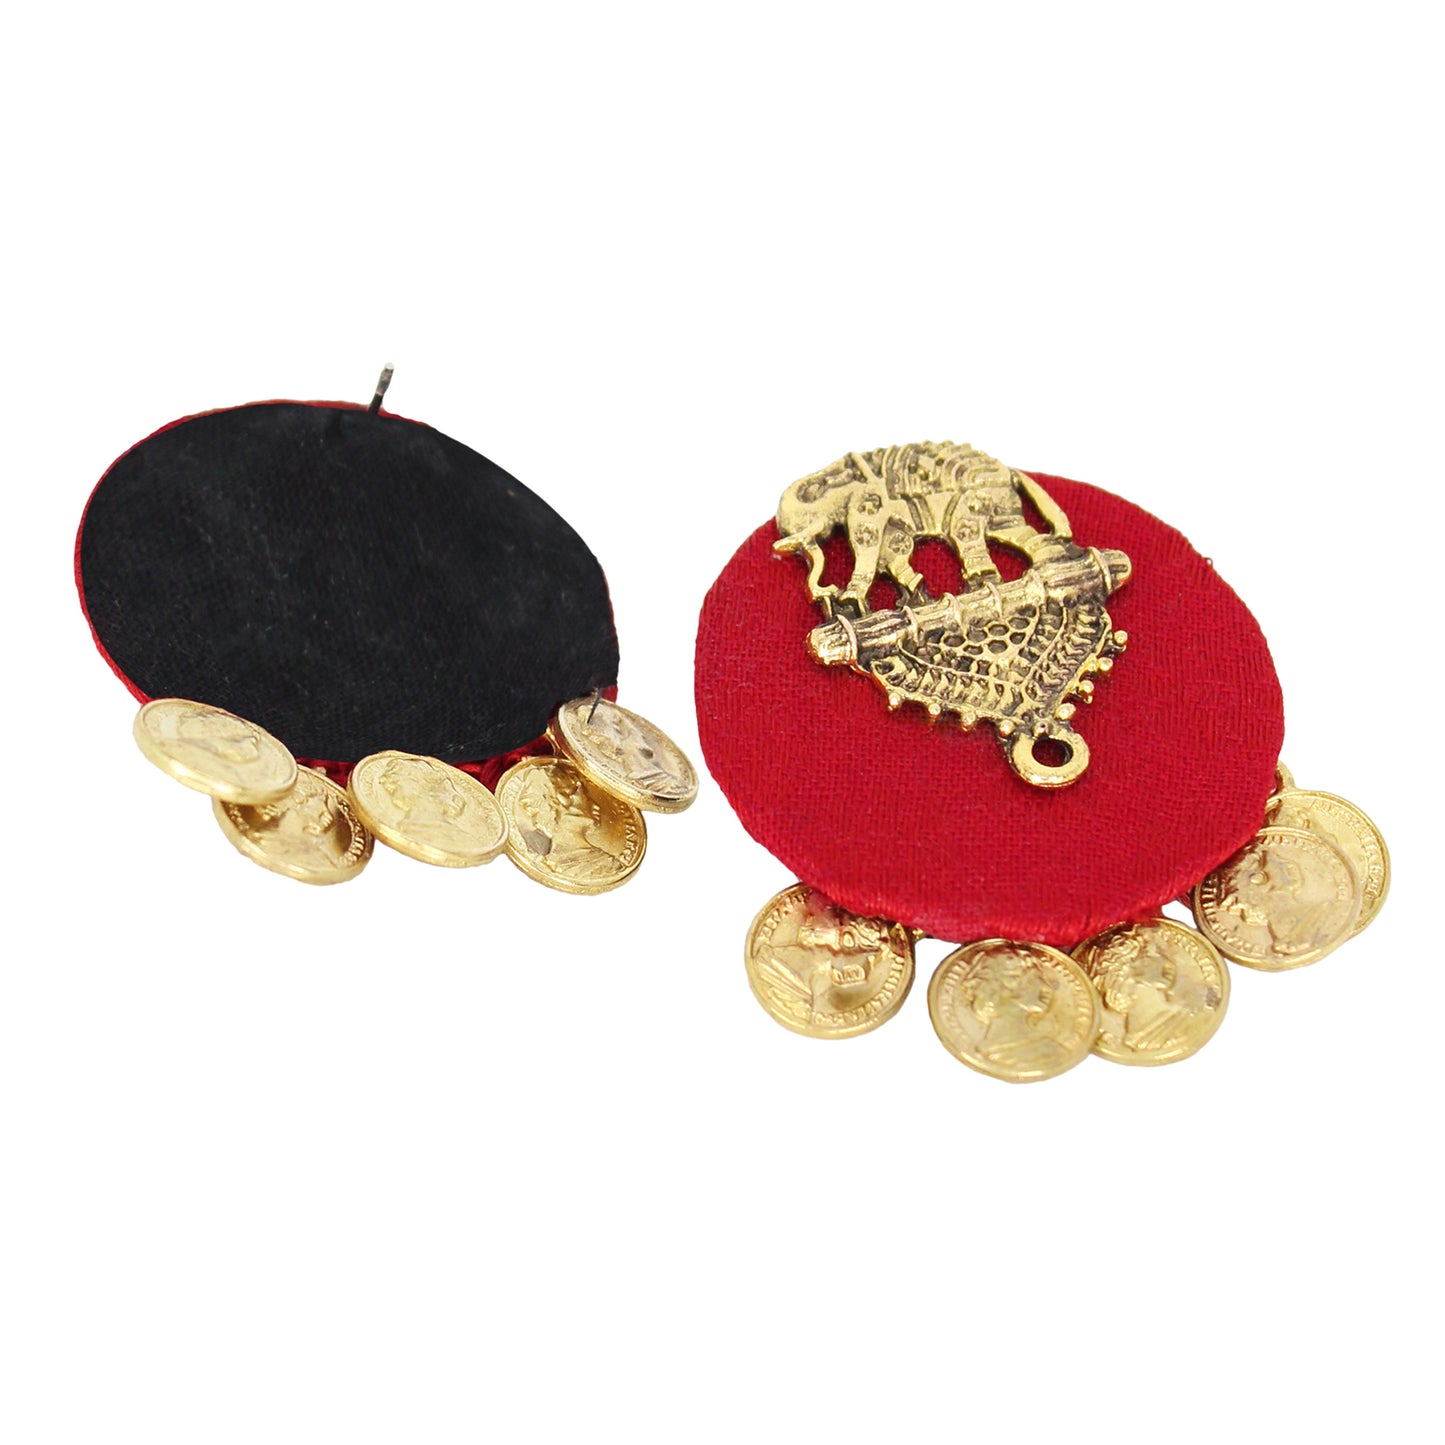 Organic Vibes Handmade Red Elephant Design Antique Coin Studded Fabric Earrings For Women